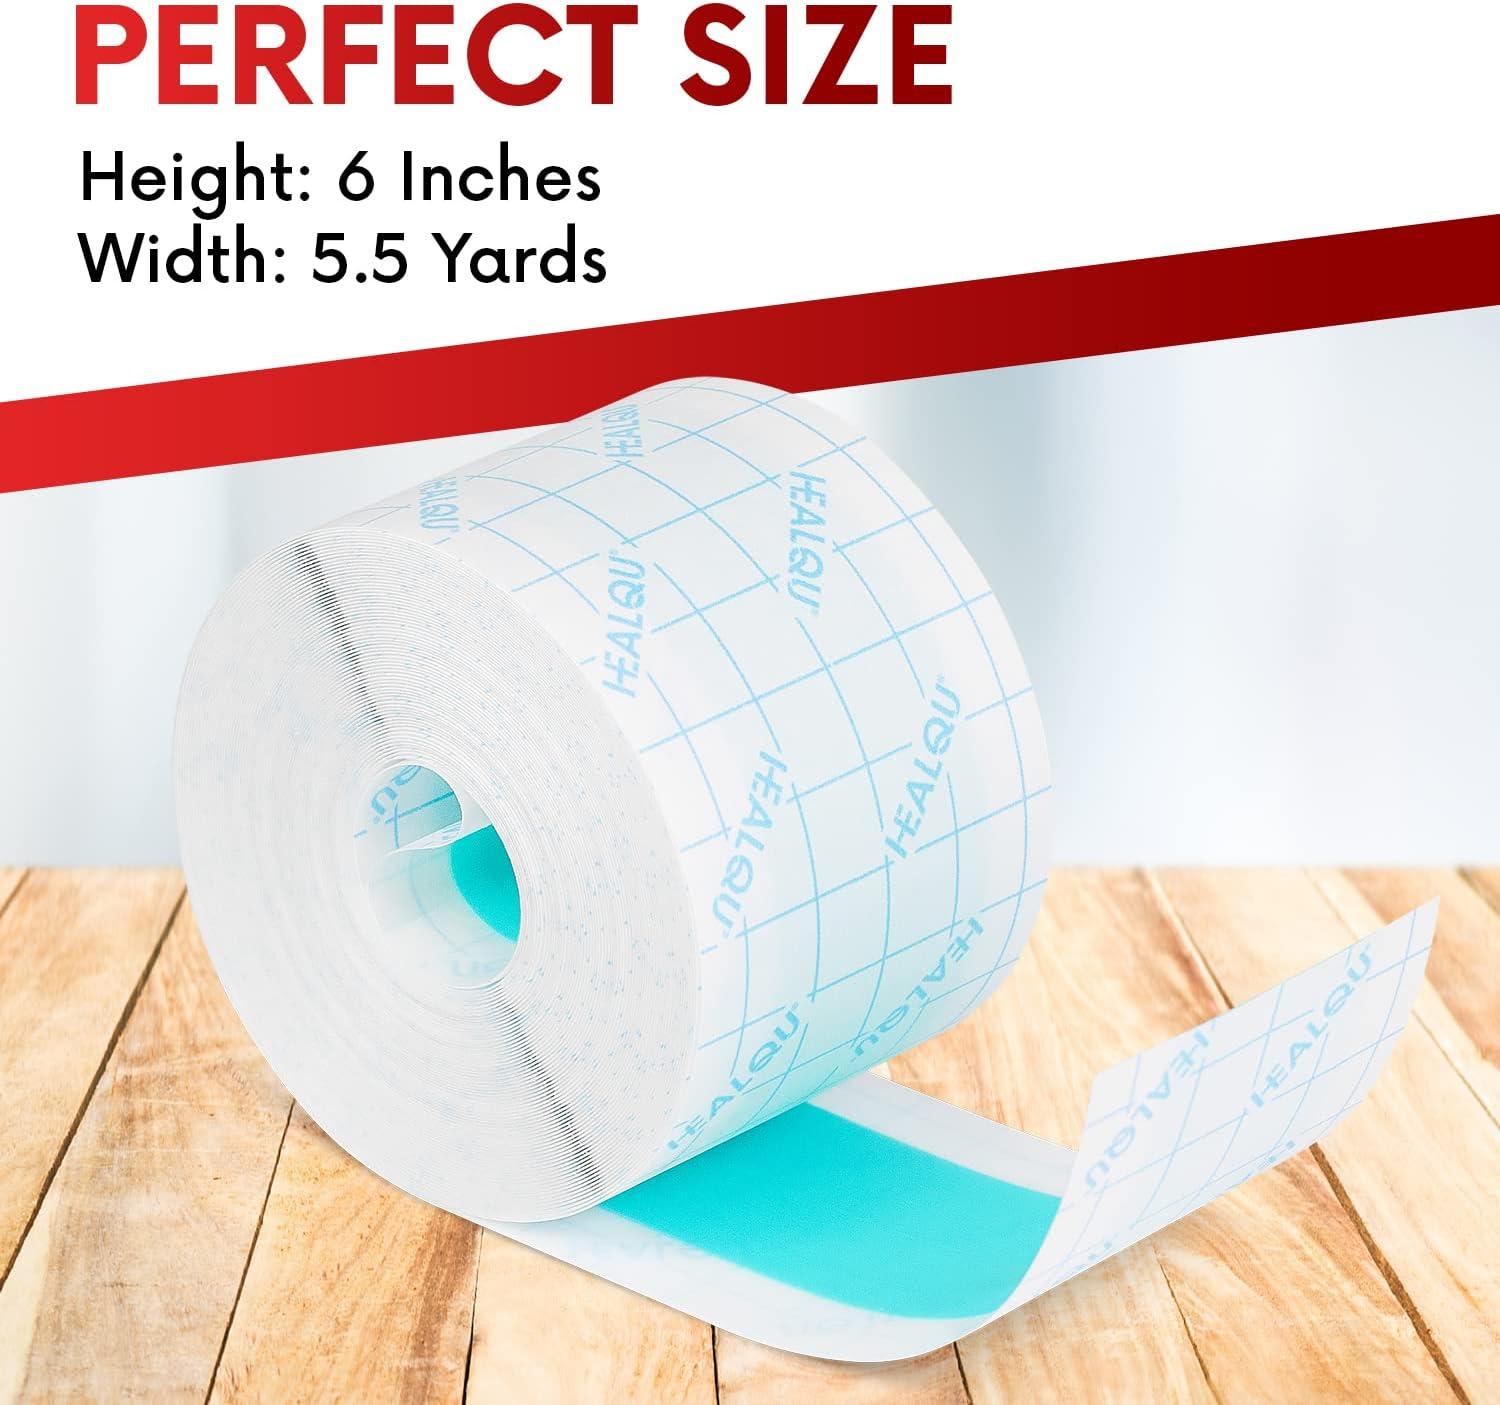 1 Roll 5 Meters Transparent Waterproof Sticky Tape, Clothes